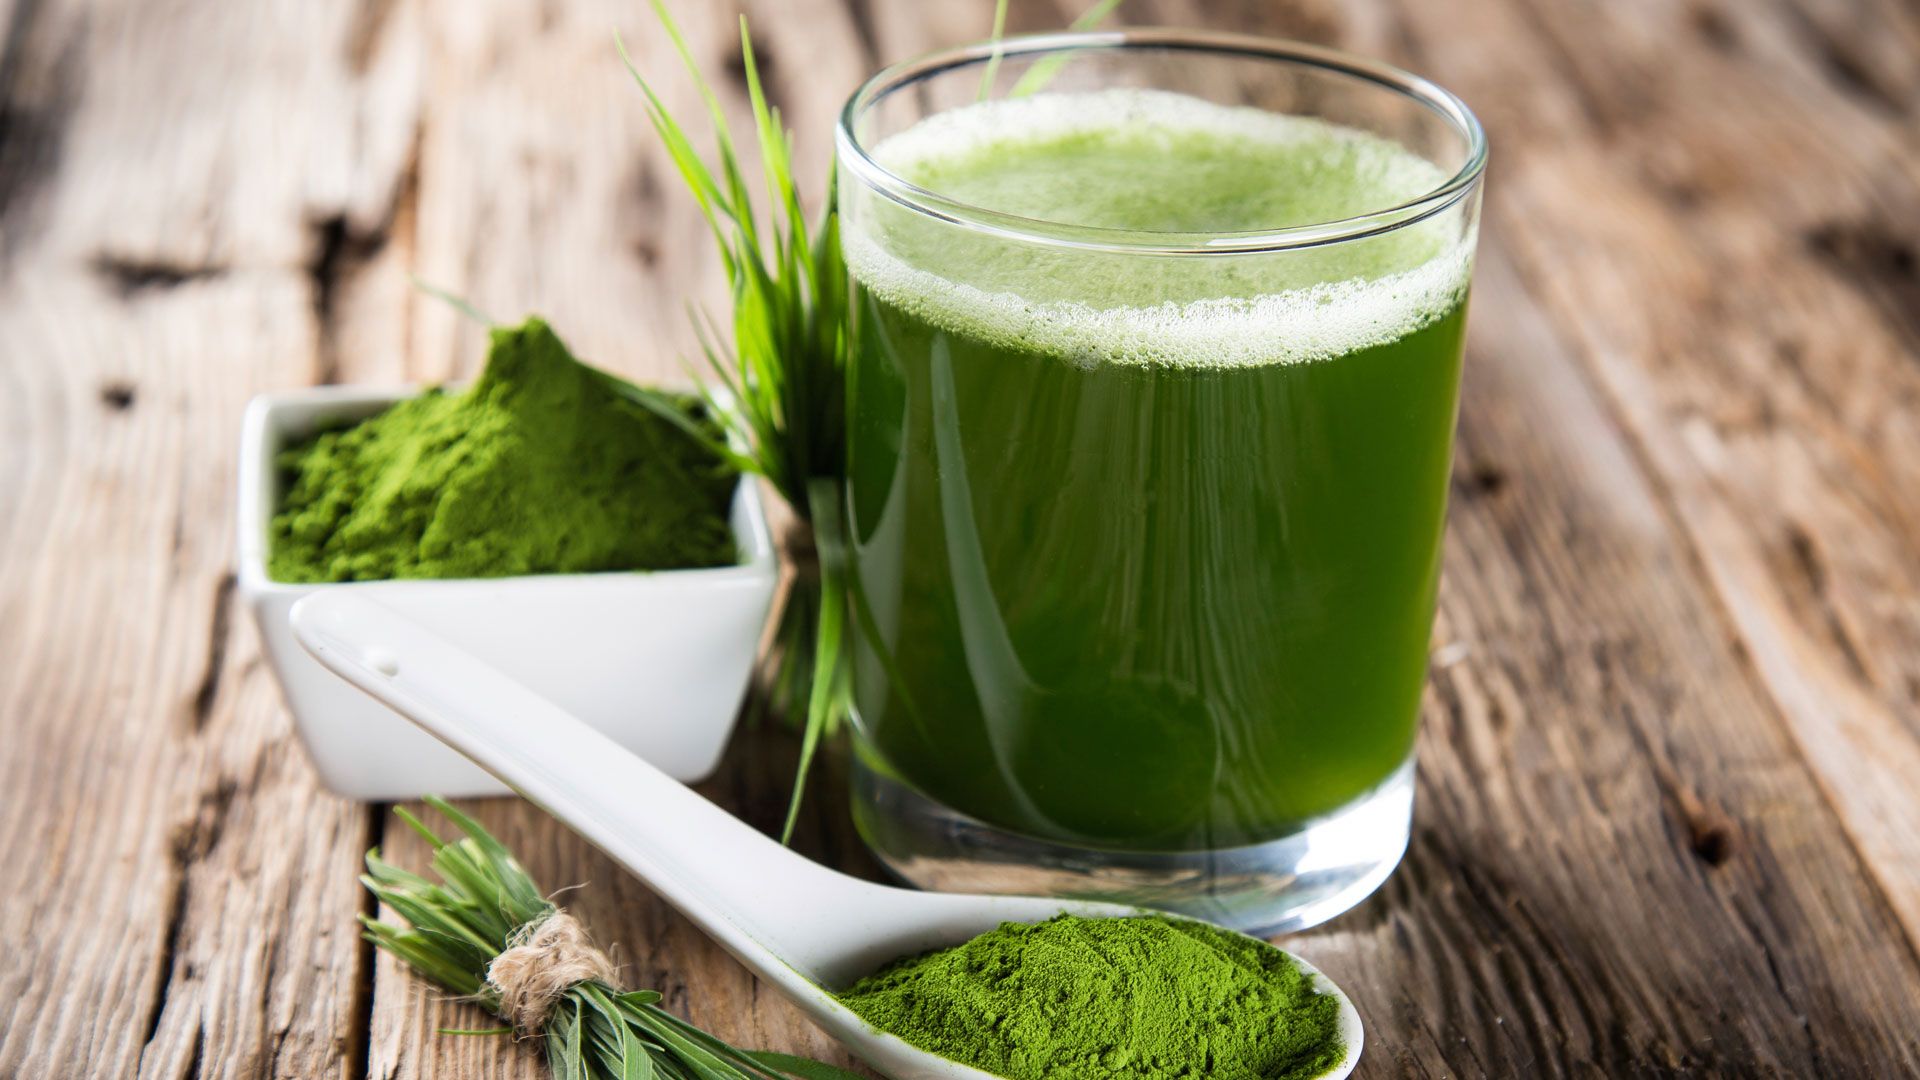 How to consume Spirulina?